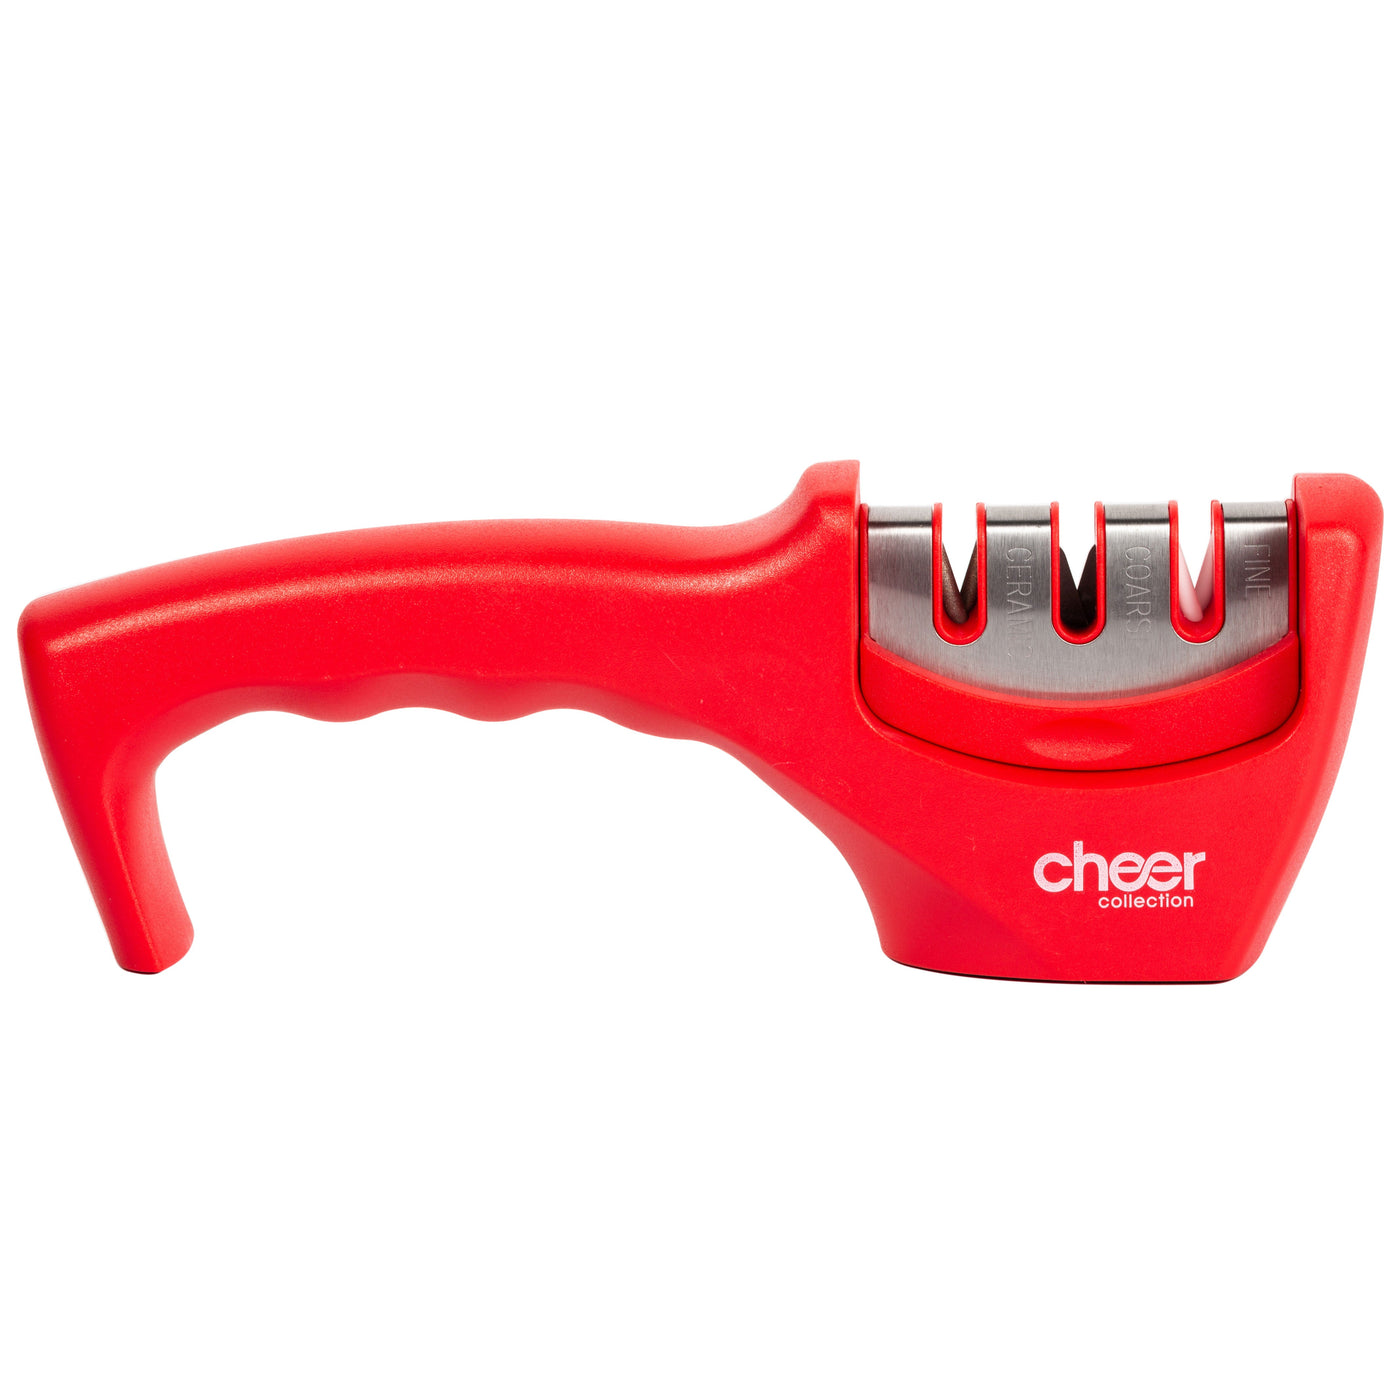 Kitchen Knife Sharpening Tool with Cut-Resistant Glove Included - Cheer  Collection